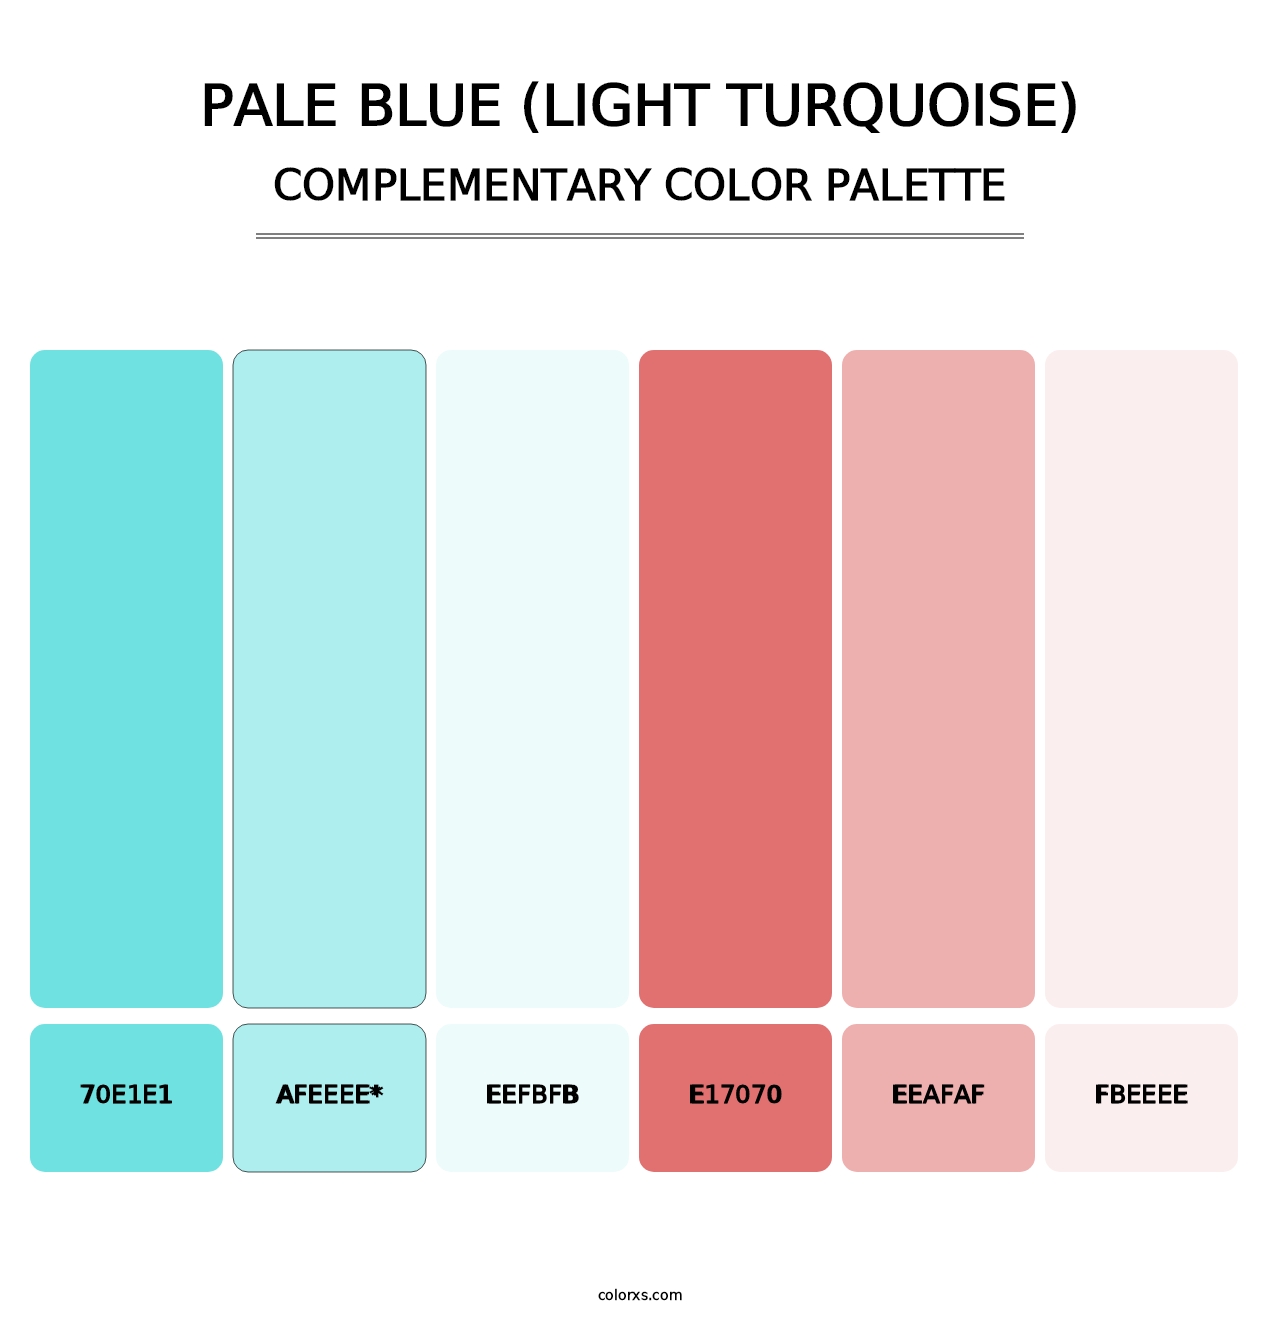 Pale Blue (Light Turquoise) - Complementary Color Palette